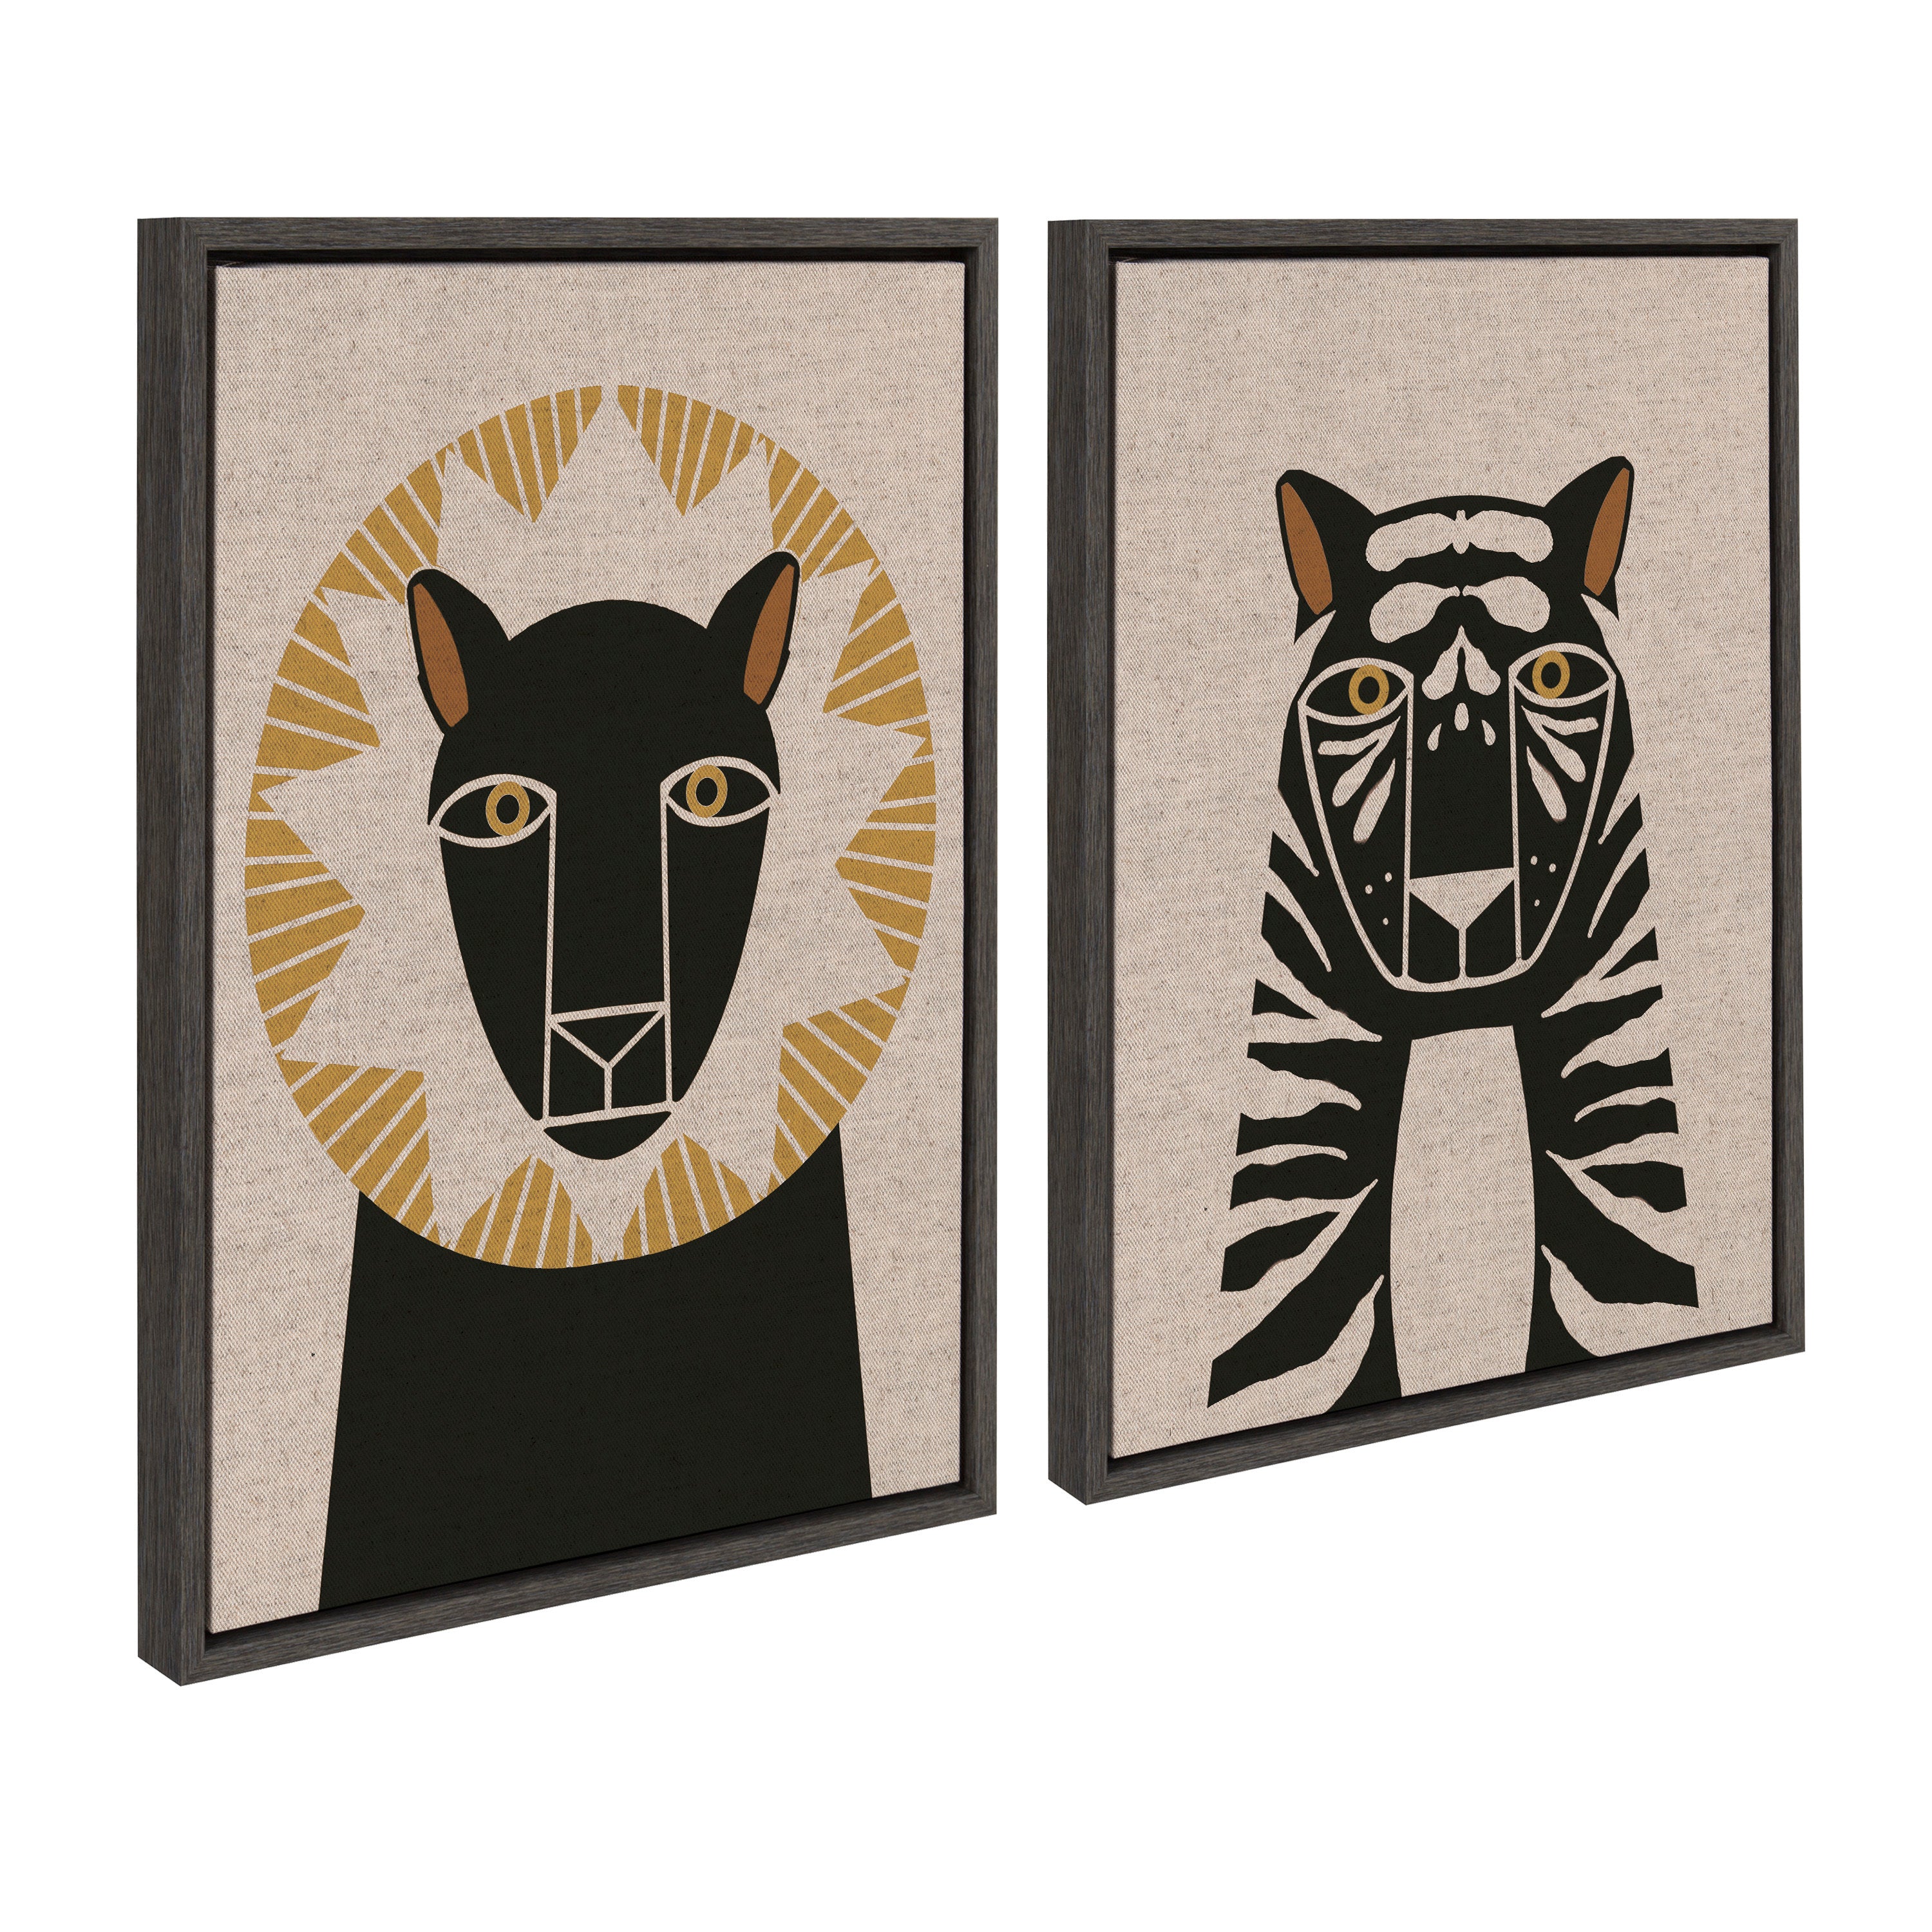 Sylvie Lion Profile Neutral Linen and Tiger Profile Neutral Linen Framed Canvas Art Set by Hannah Beisang